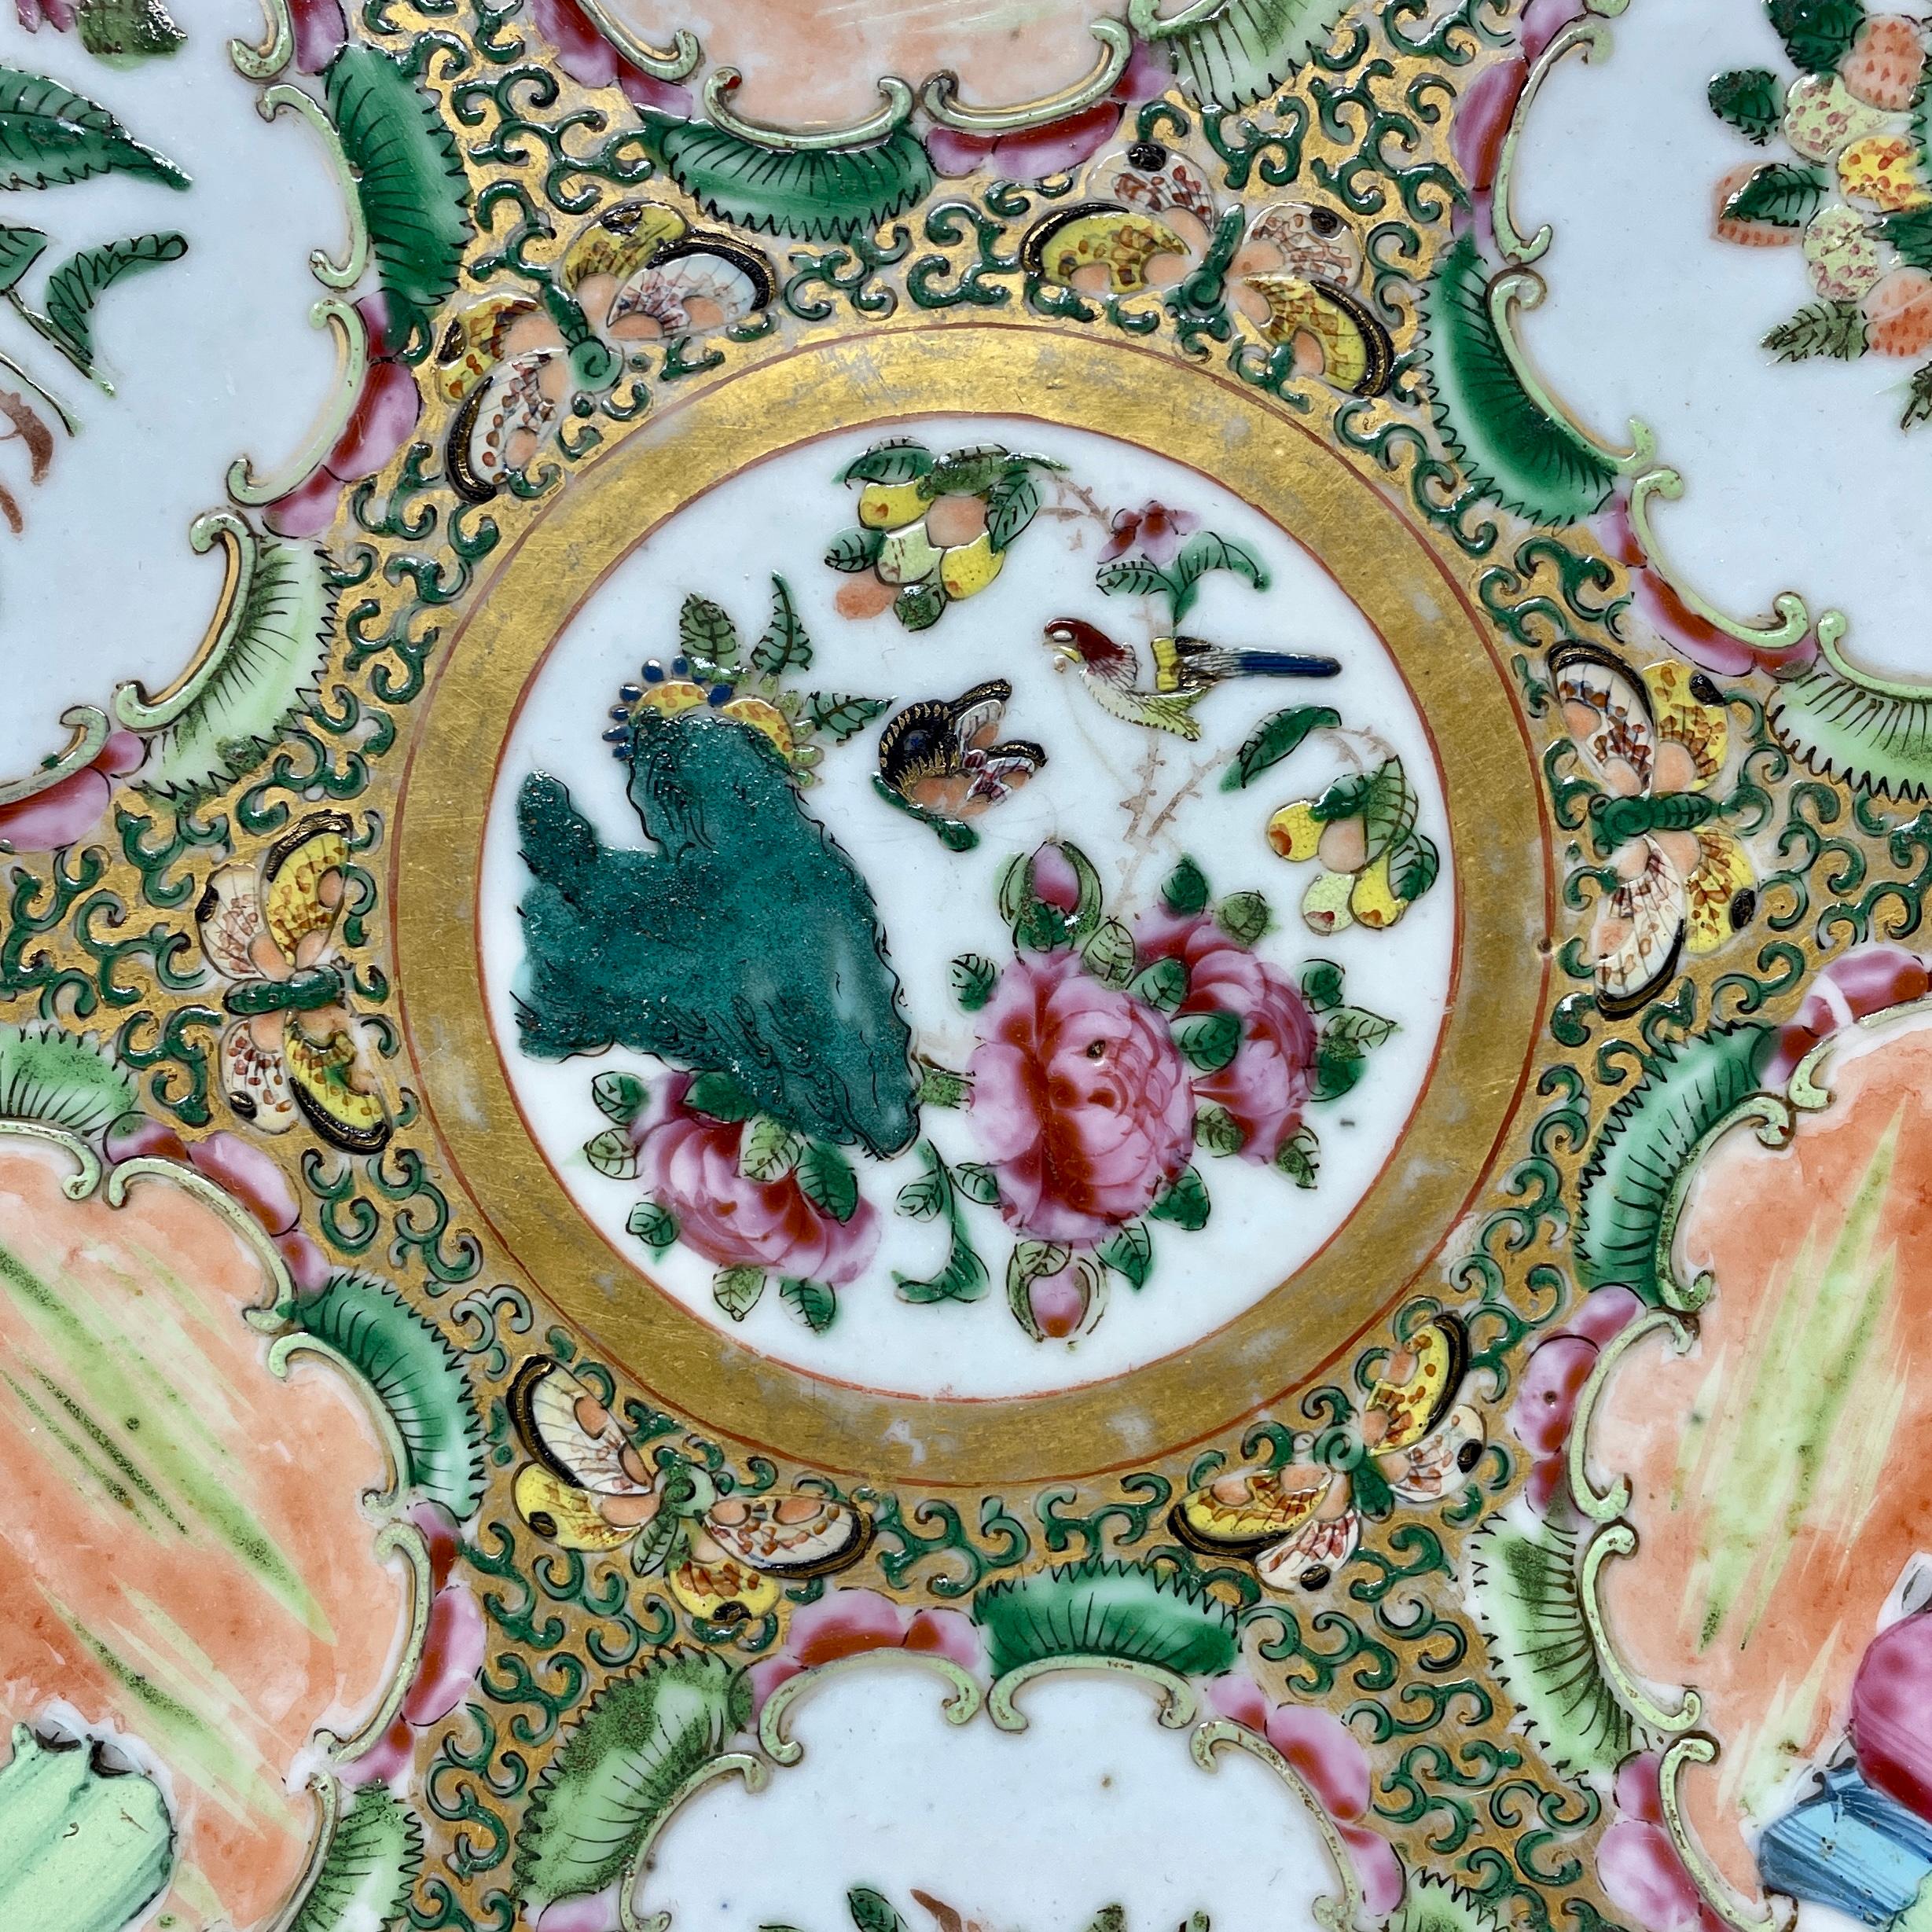 Large Antique Chinese Famille Rose Porcelain Charger Plate, Circa 1880-1890 For Sale 1